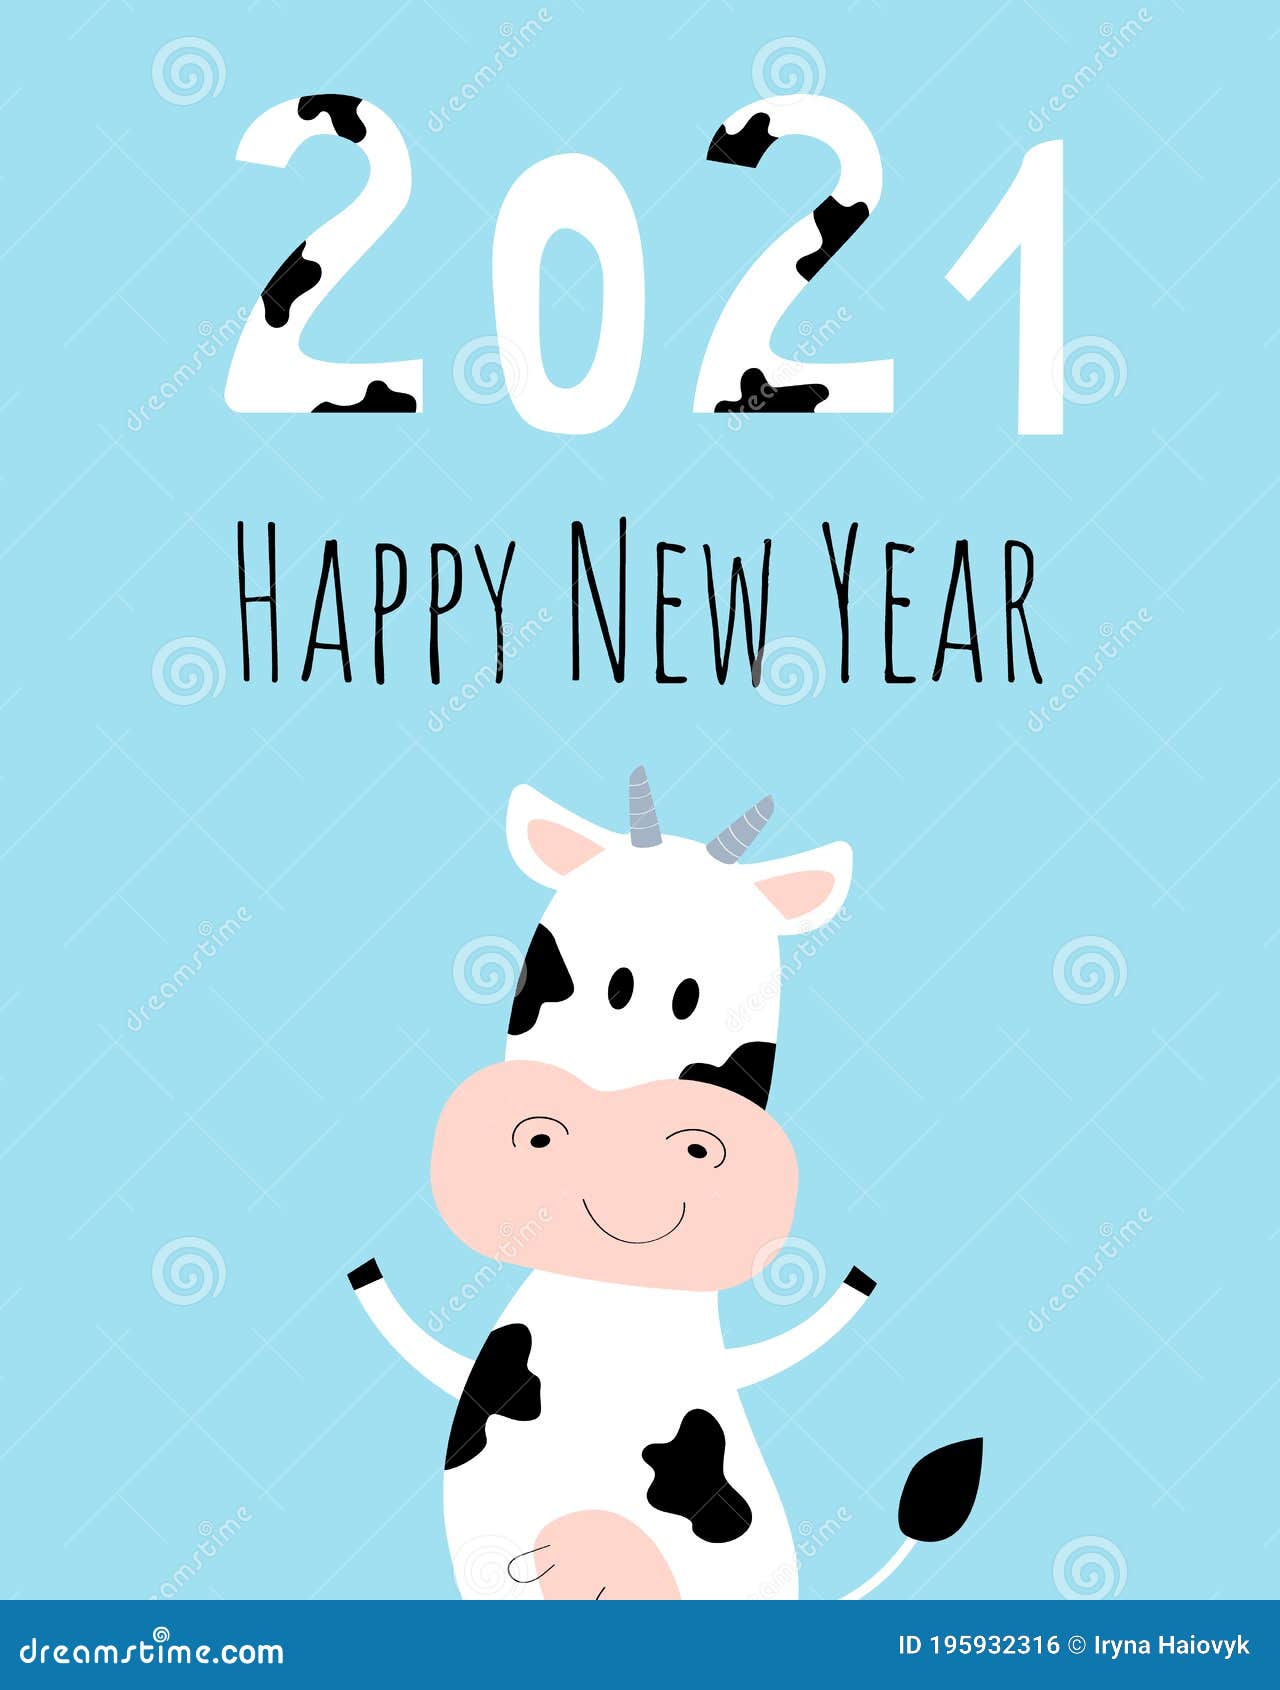 Happy New Year 2021 Greeting Card With Cow Cute Cow Character. Vector ...